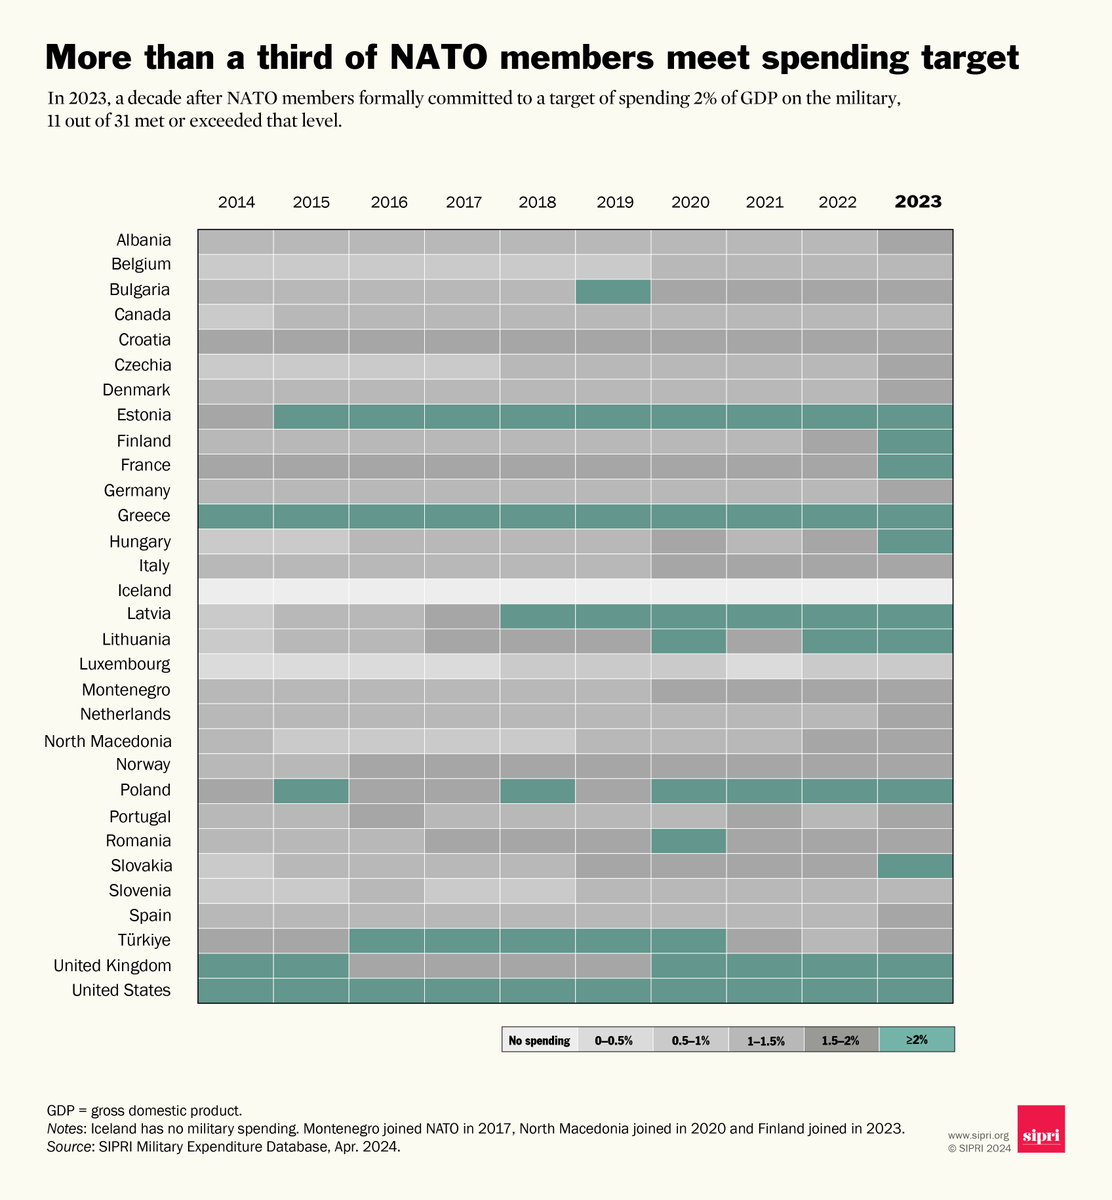 USA remains @NATO's major spender but European members increase share. Eleven of the 31 NATO members in 2023 met NATO’s 2% of GDP military spending target, which was 4 more than in 2022.